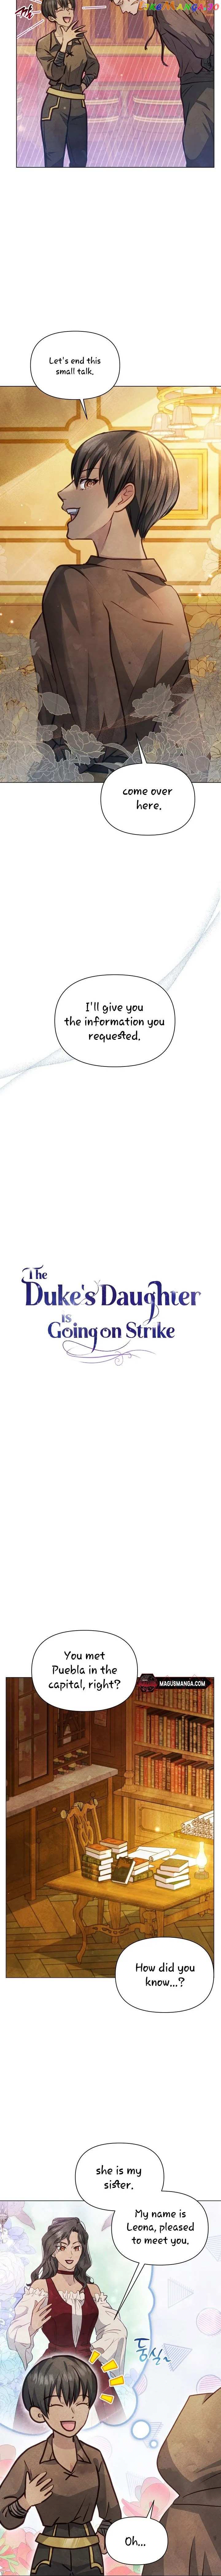 The Duke’s Daughter is Going on Strike Chapter 23 - page 5